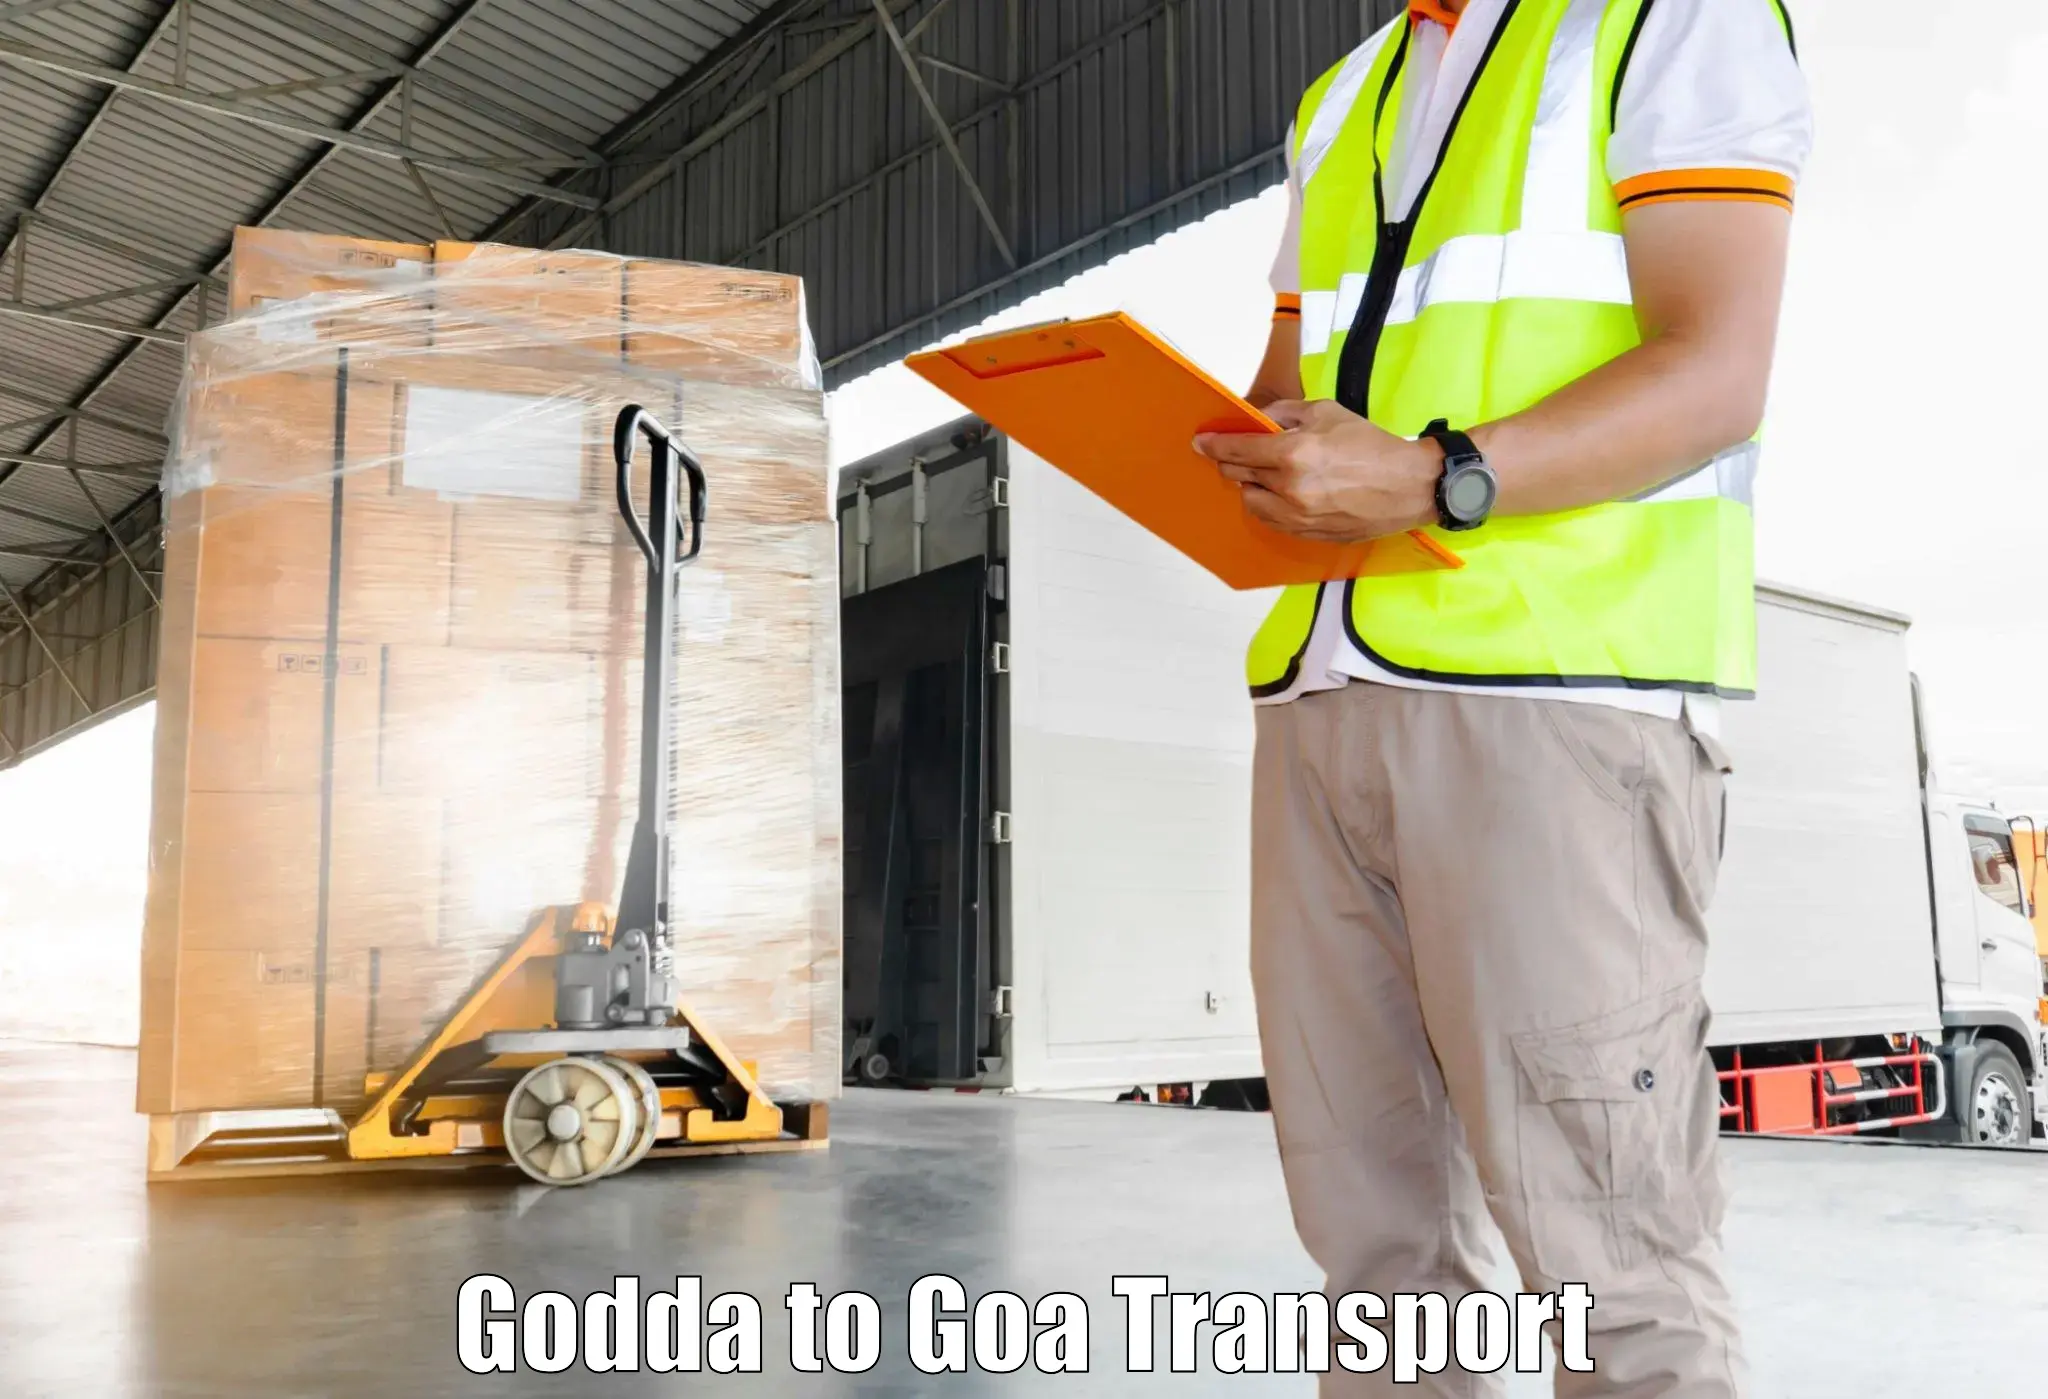 Transport bike from one state to another Godda to Bardez